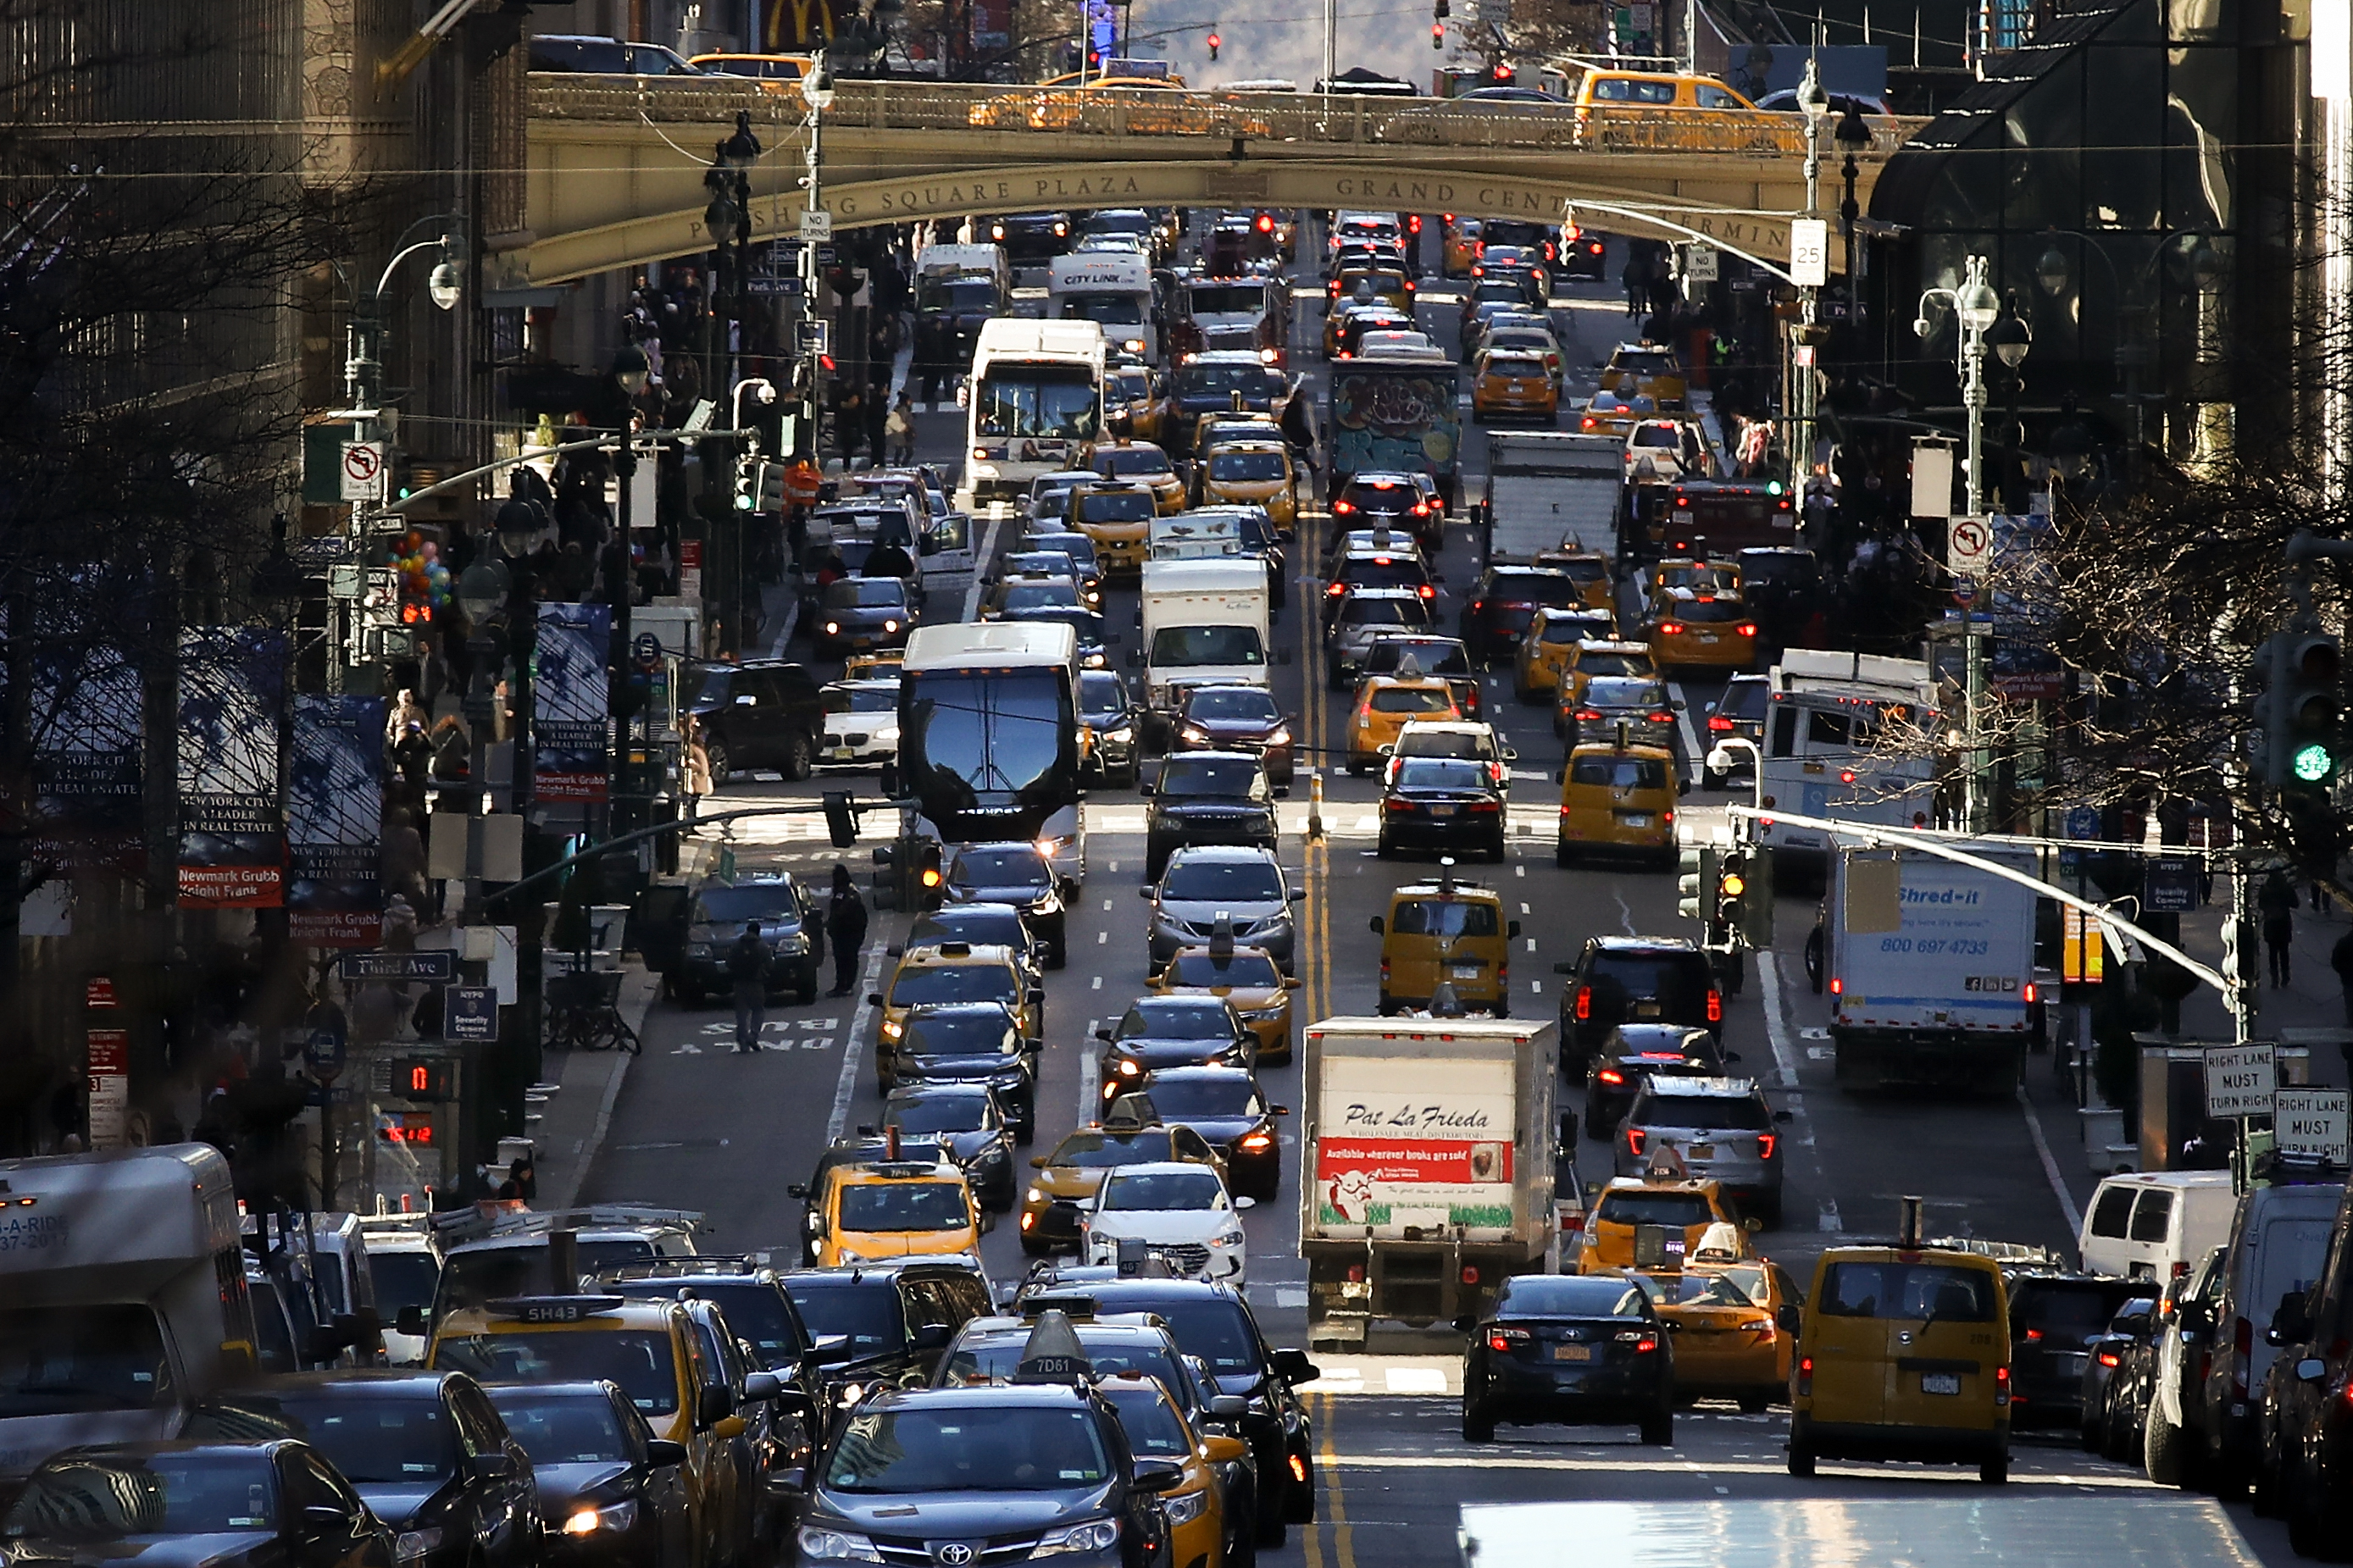 MTA releases congestion pricing details, with fees that
could be as high as $23 for drivers